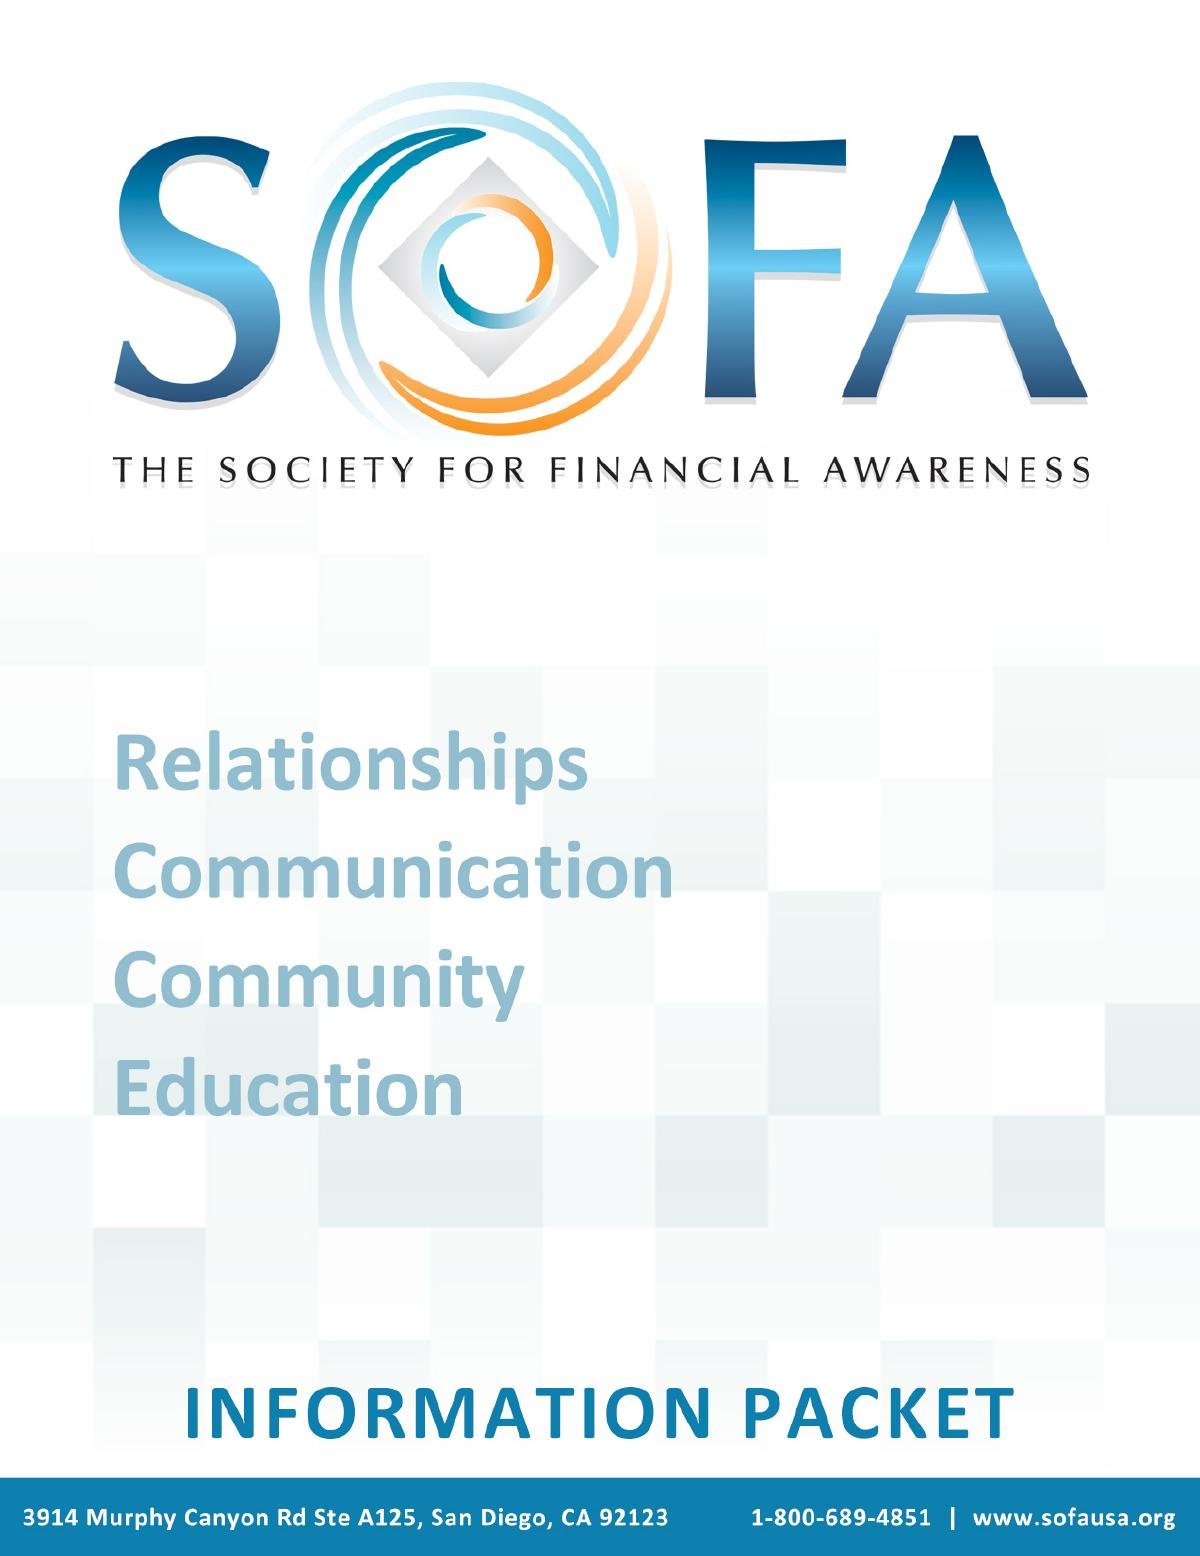 Learn More About The Society For Financial Awareness (SOFA) 